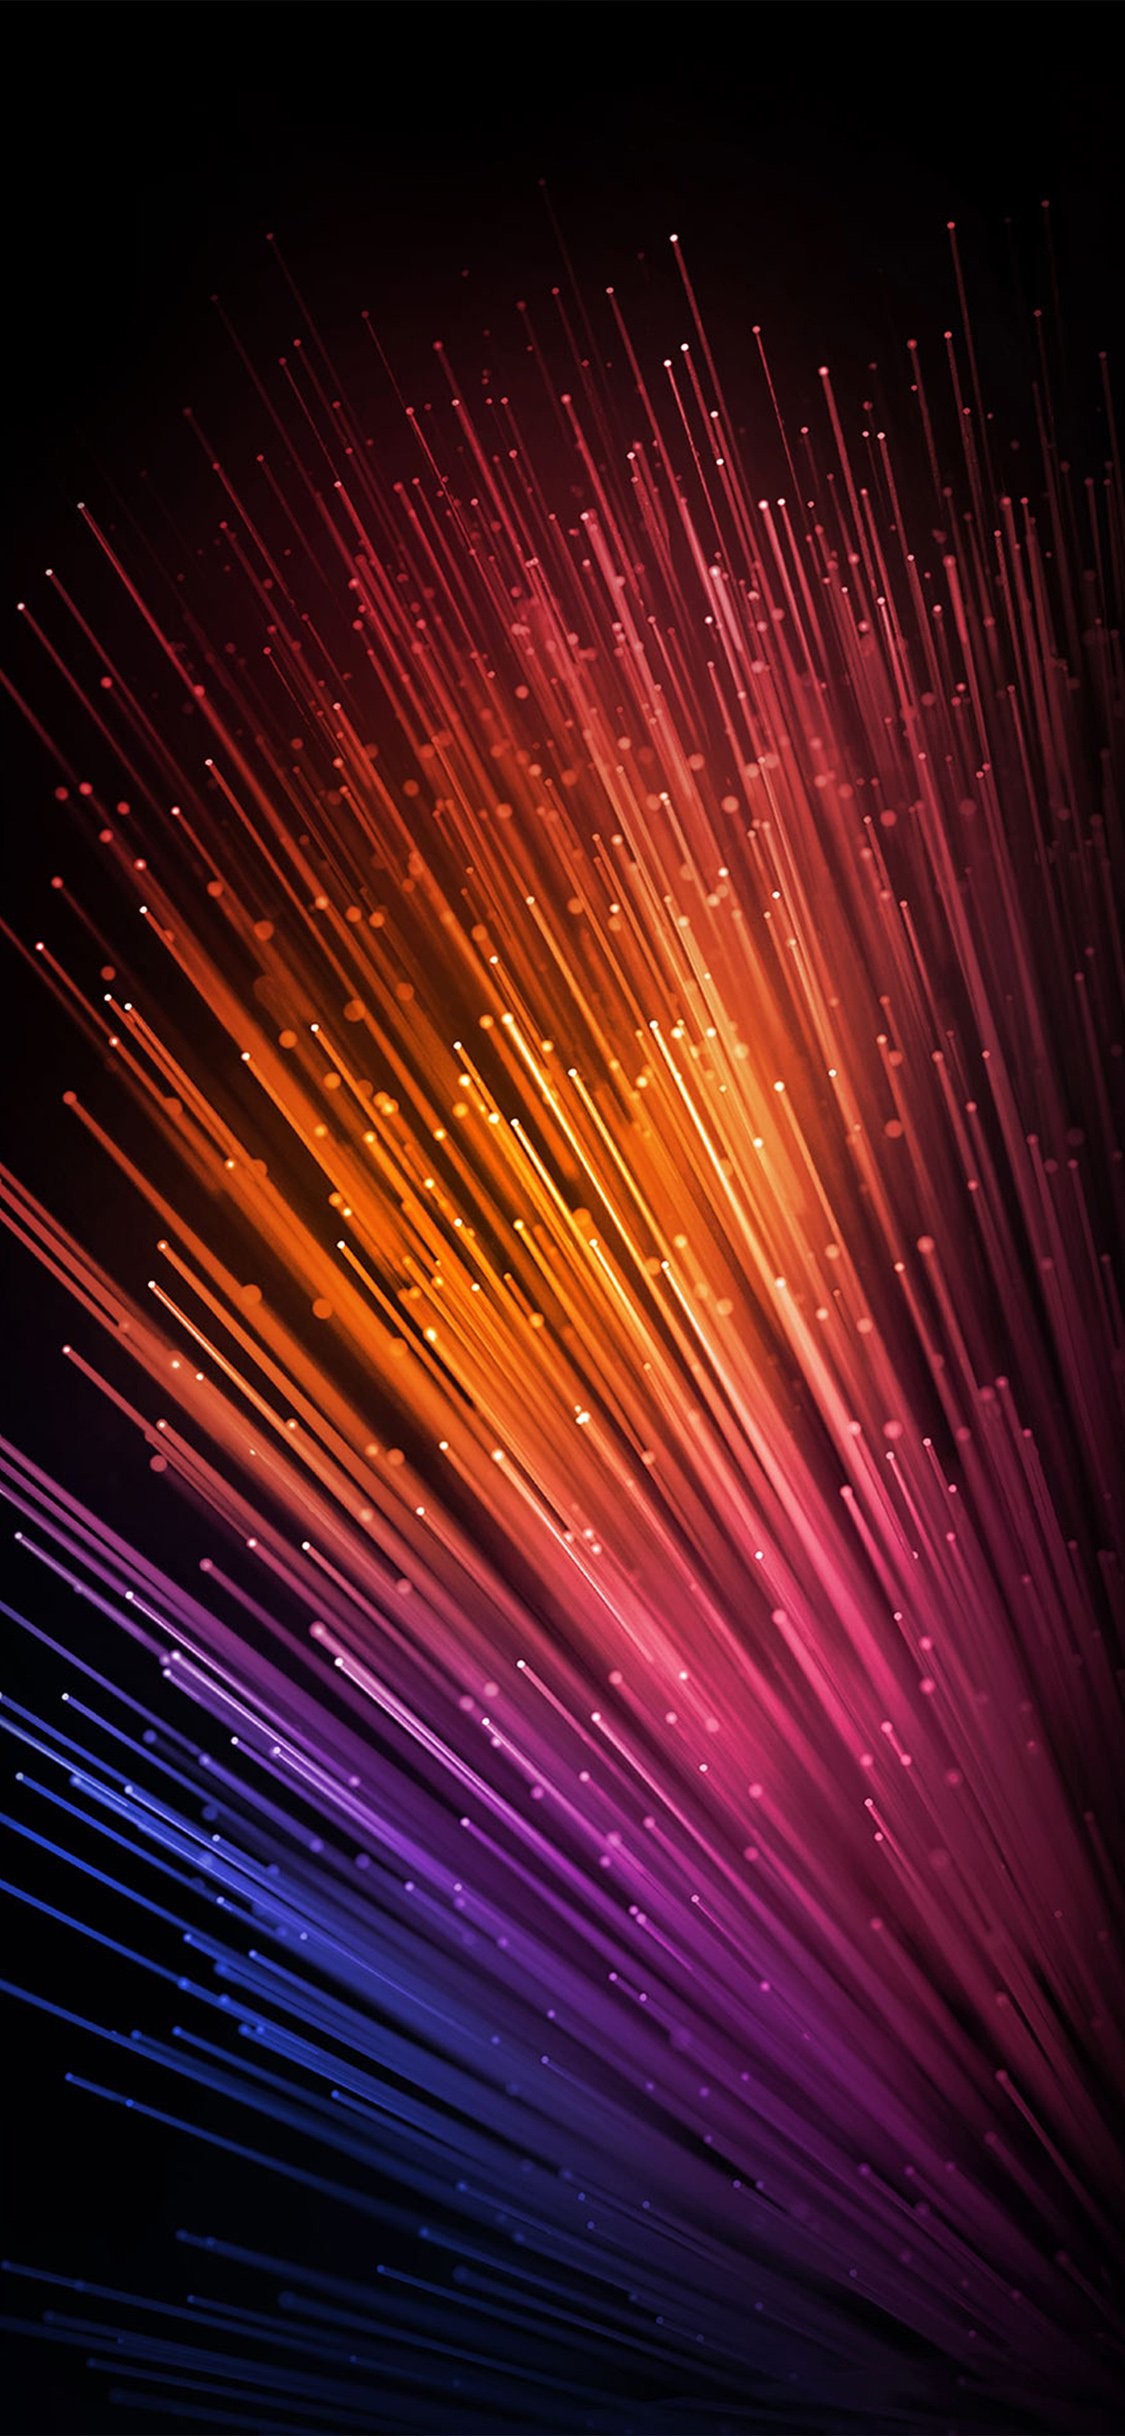 1125x2436 iPhoneXpapers.com | iPhone X wallpaper | vw72-simple-rainbow-line-awesome -pattern-background